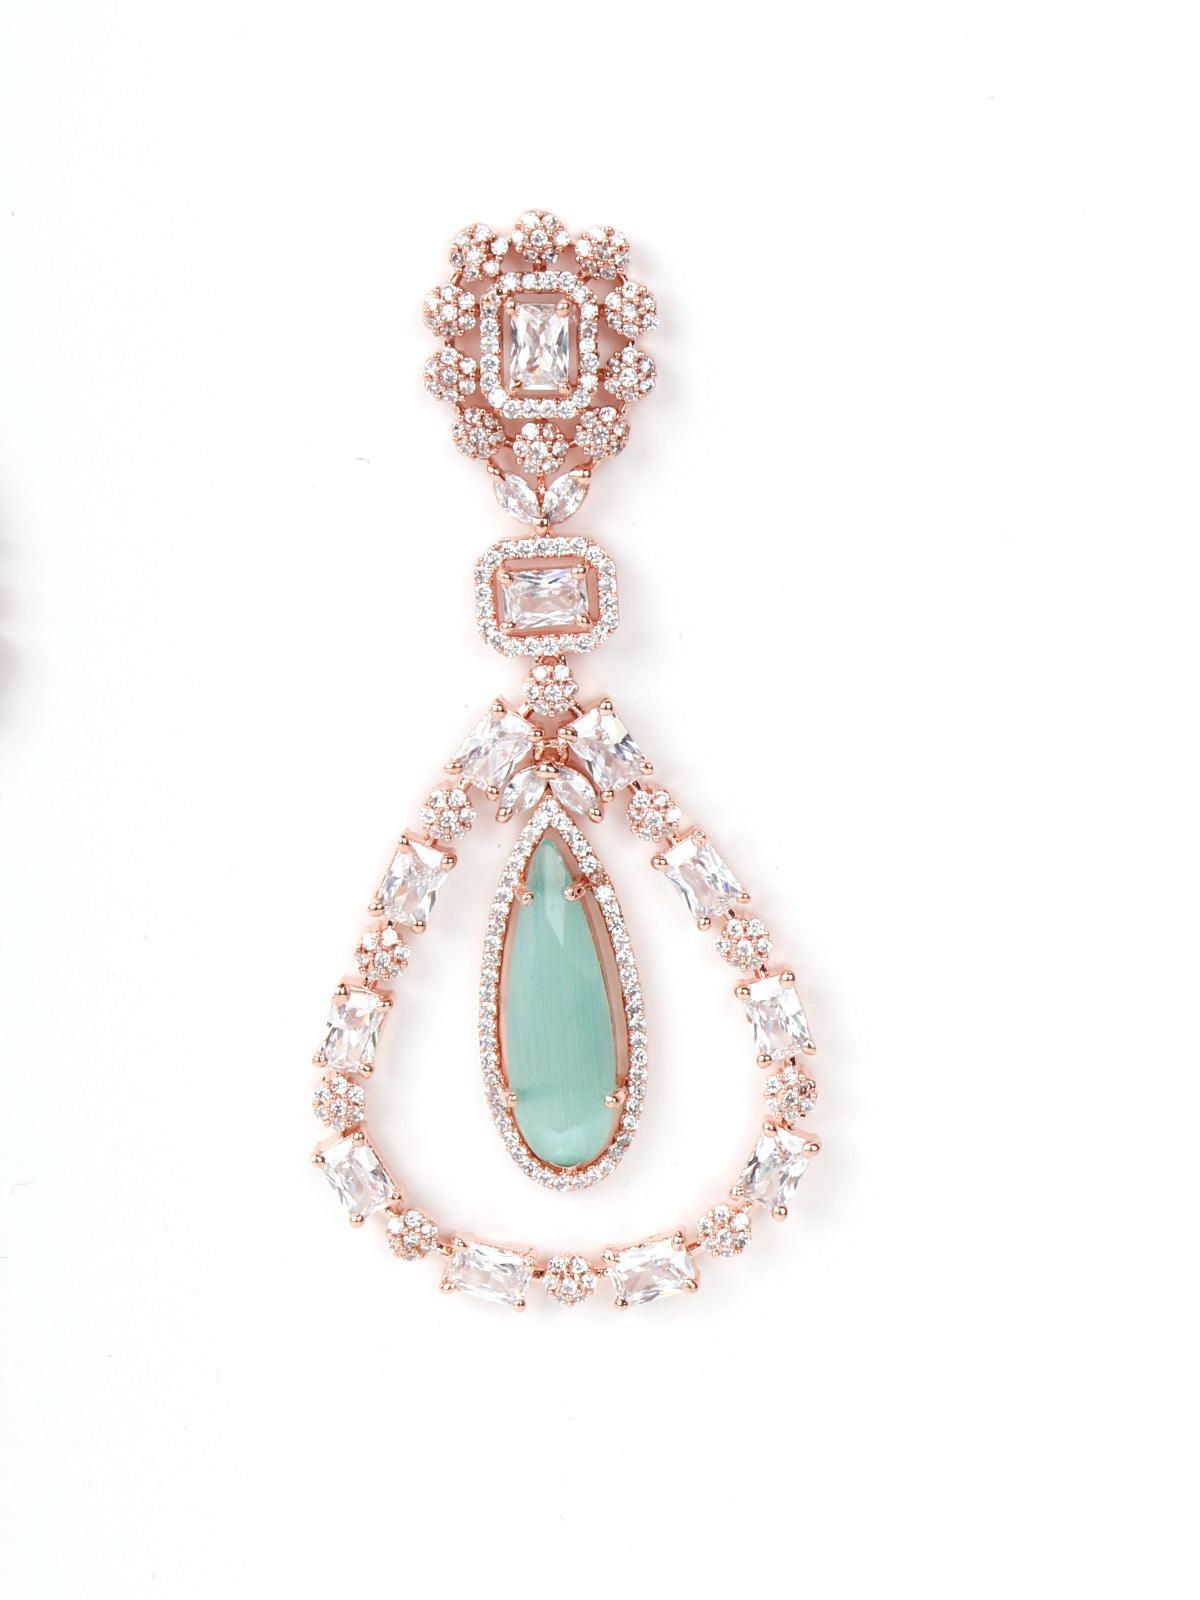 Authentic danglers with emerald stone Earring - Odette